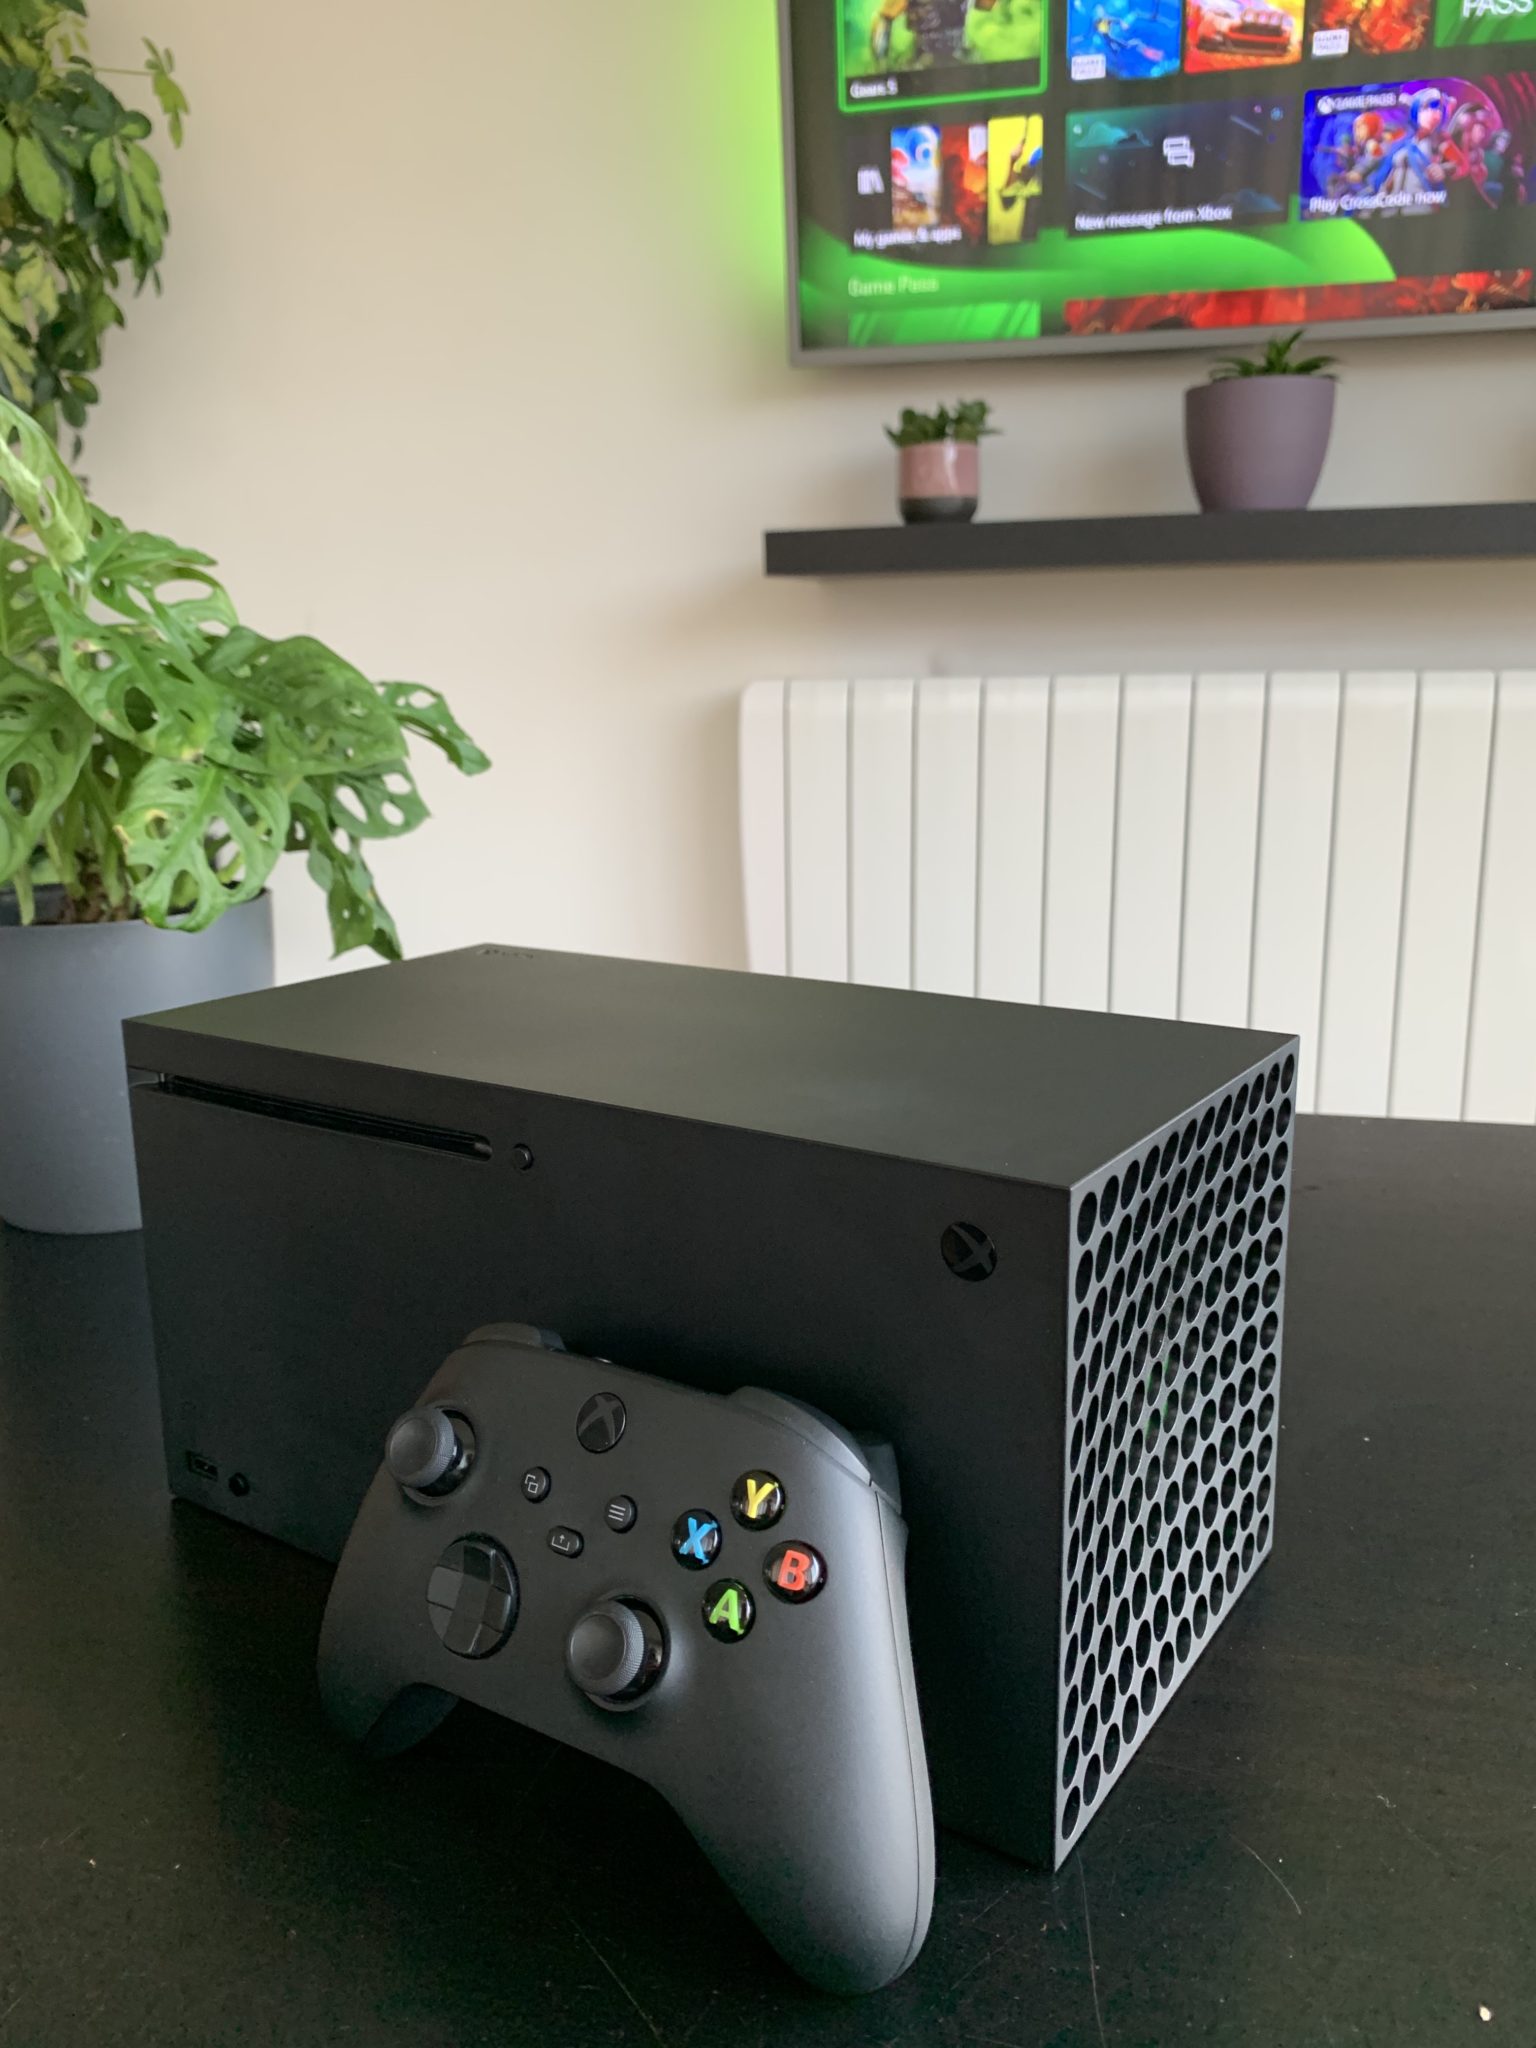 Xbox One X review: Microsoft's new flagship console lacks purpose